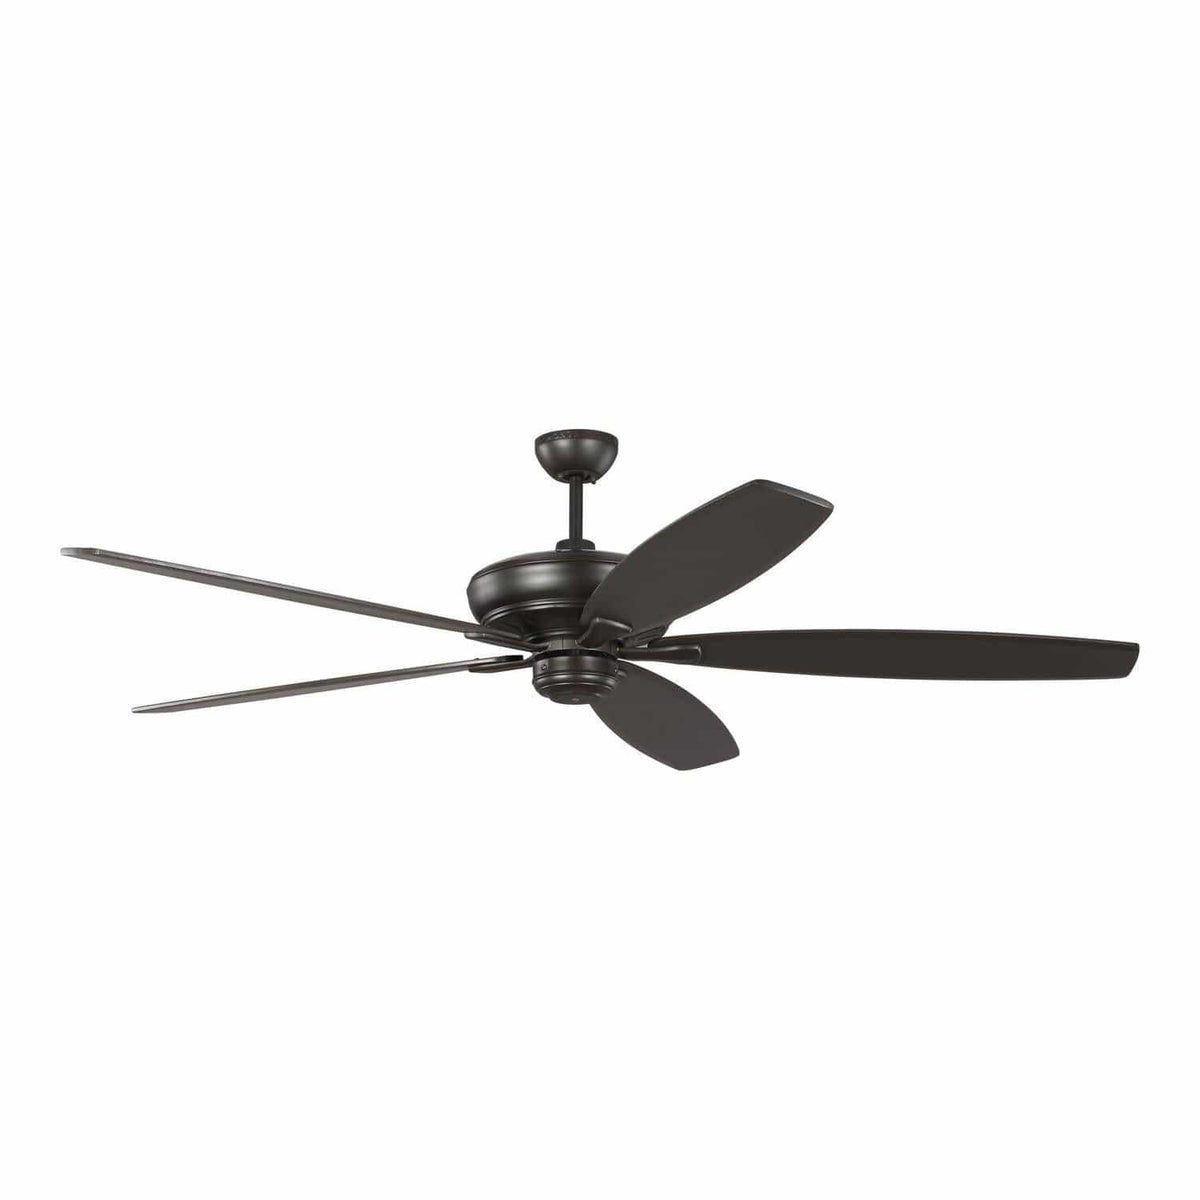 Visual Comfort Fan Collection - Dover Ceiling Fan - 5DVR68OZ | Montreal Lighting & Hardware